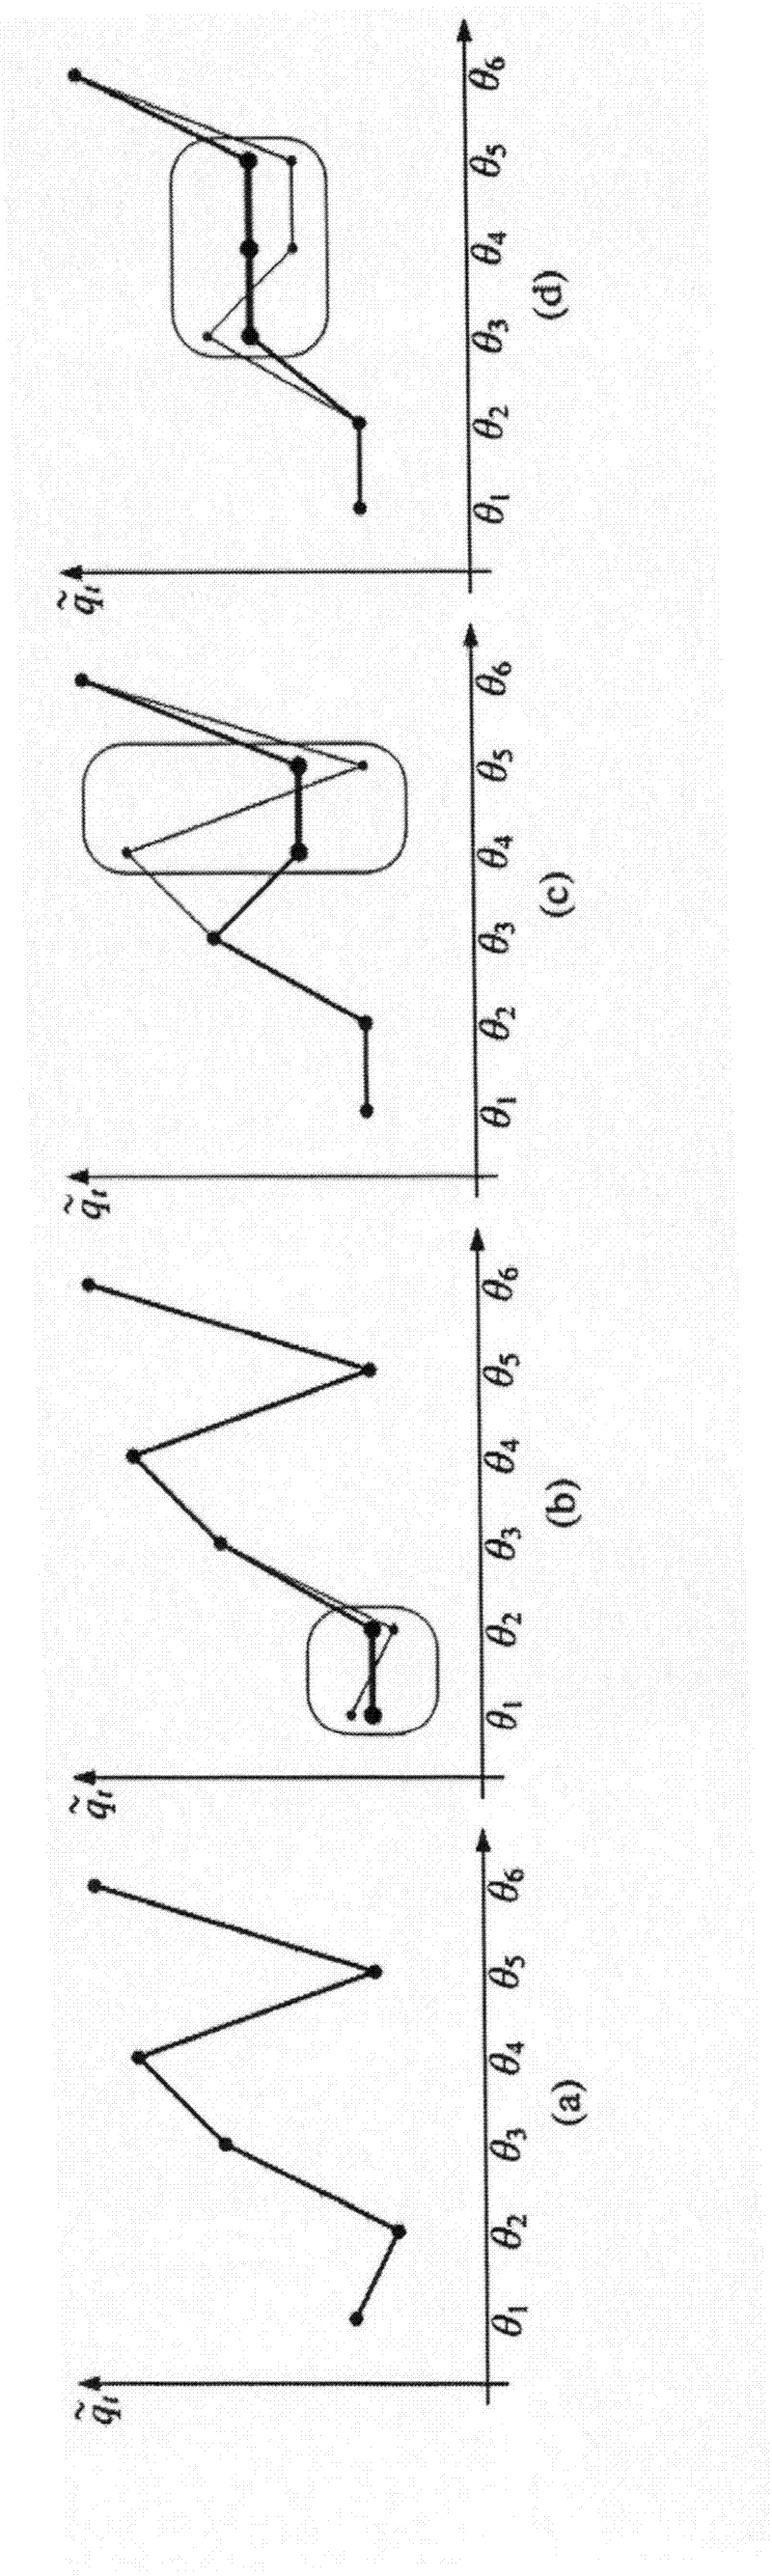 Contract-based dynamic spectrum allocation method in radio network